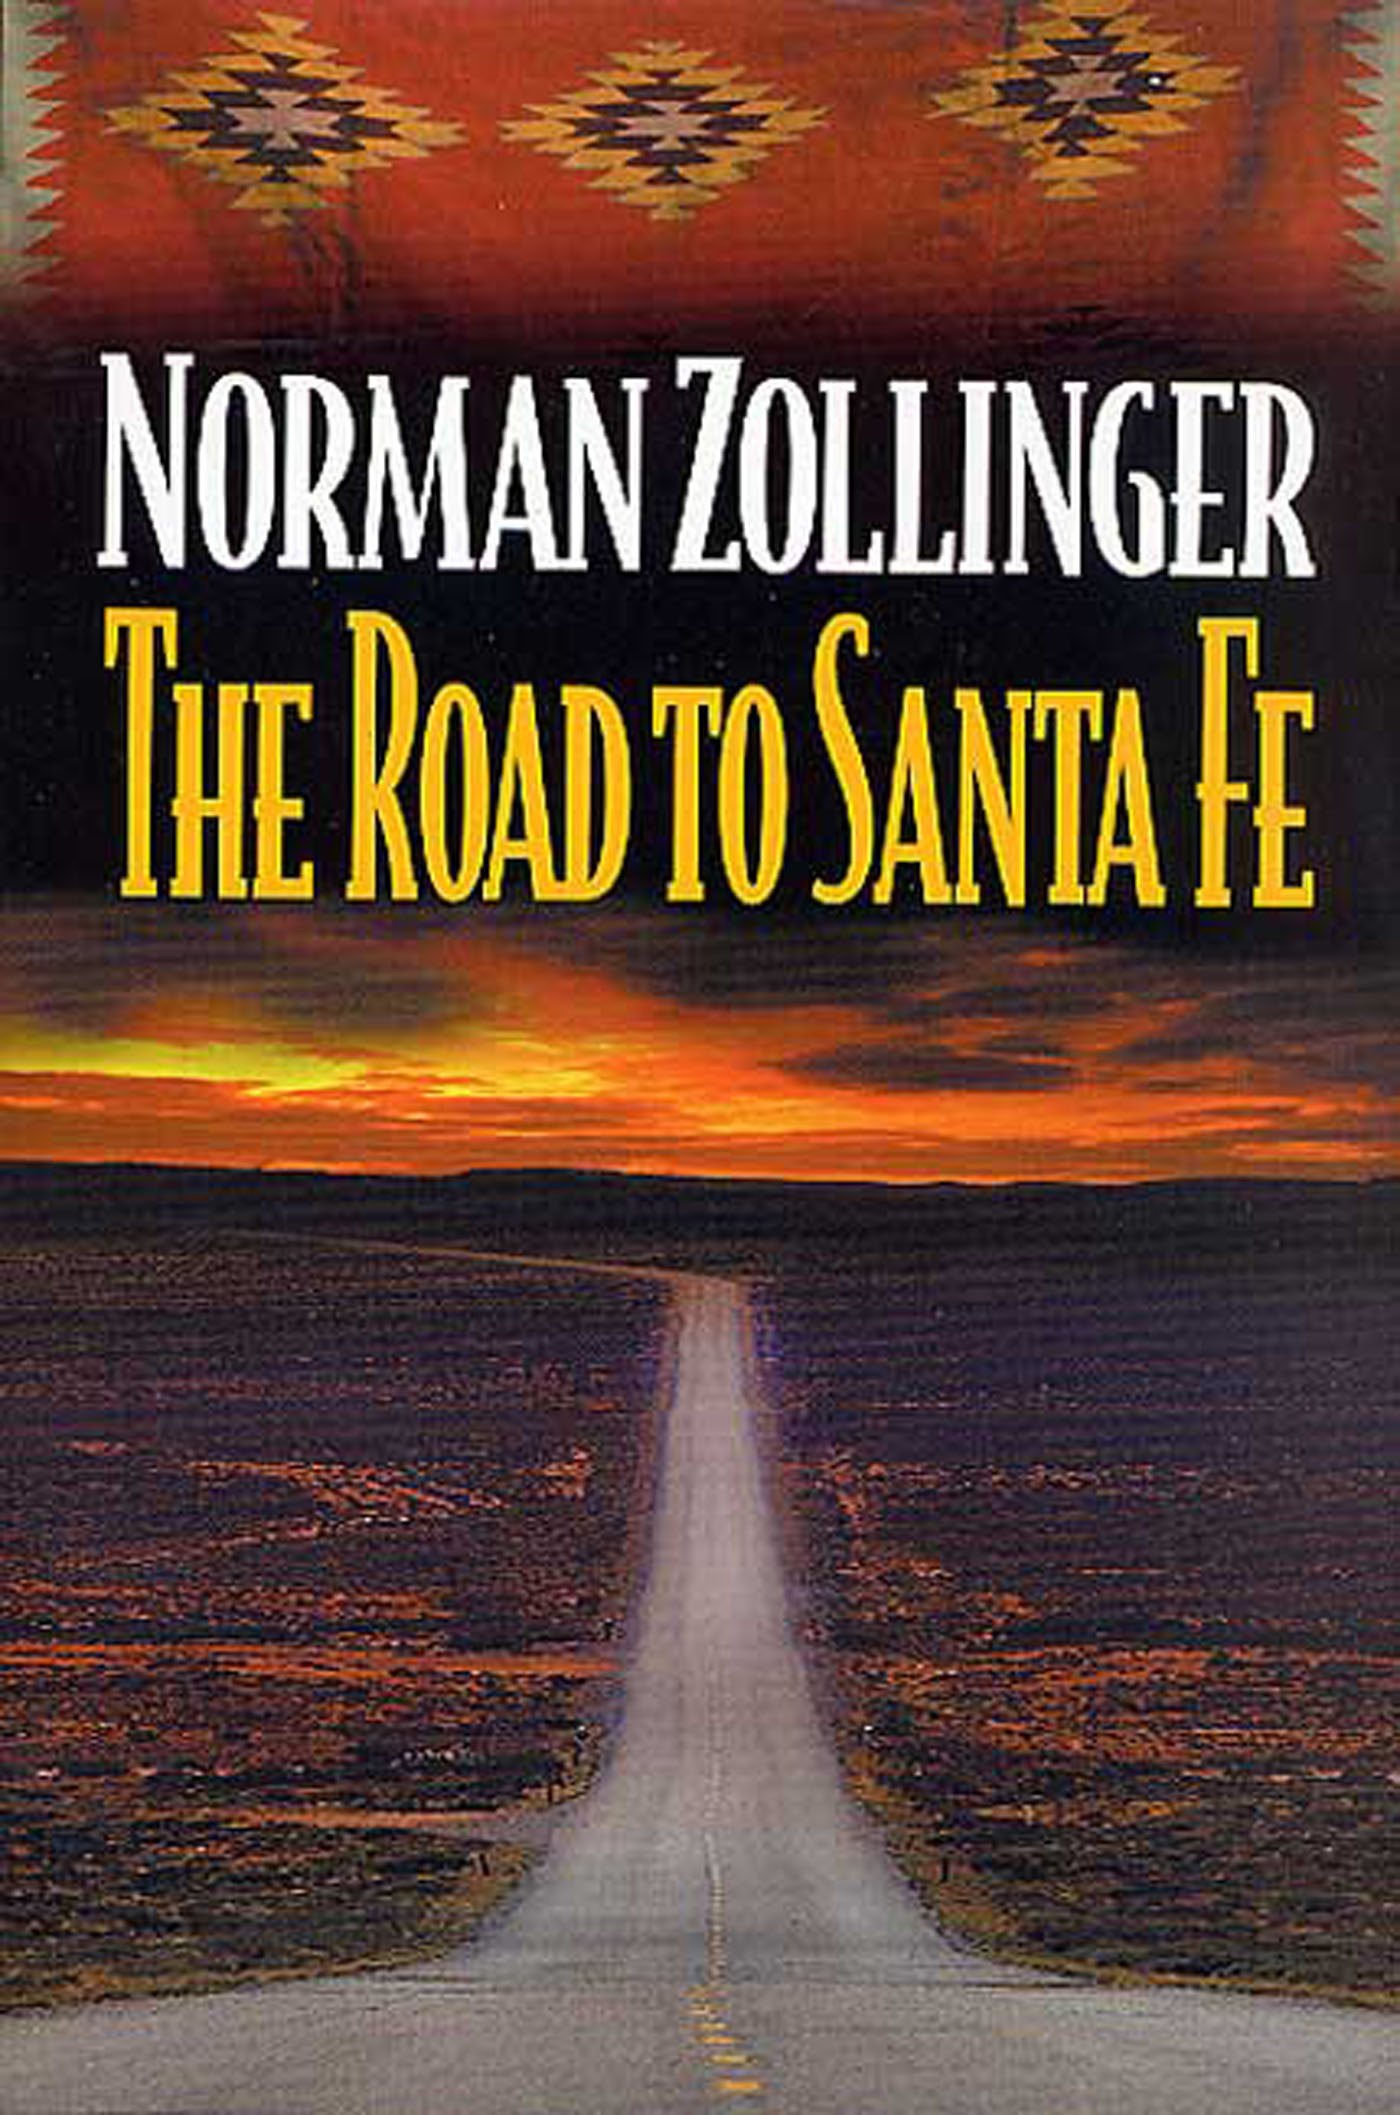 The Road to Santa Fe by Norman Zollinger